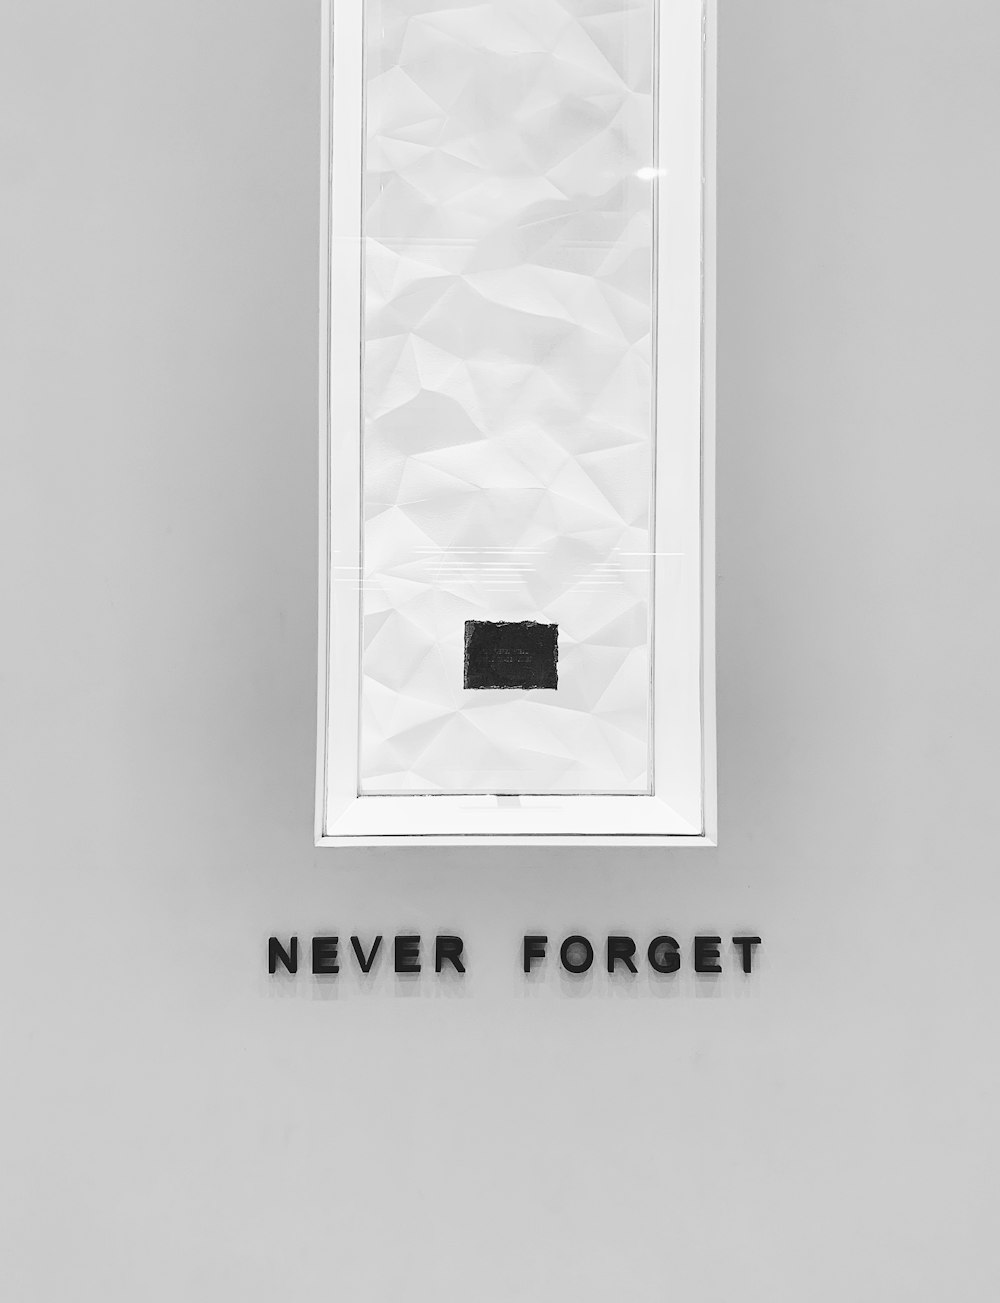 Never Forget text